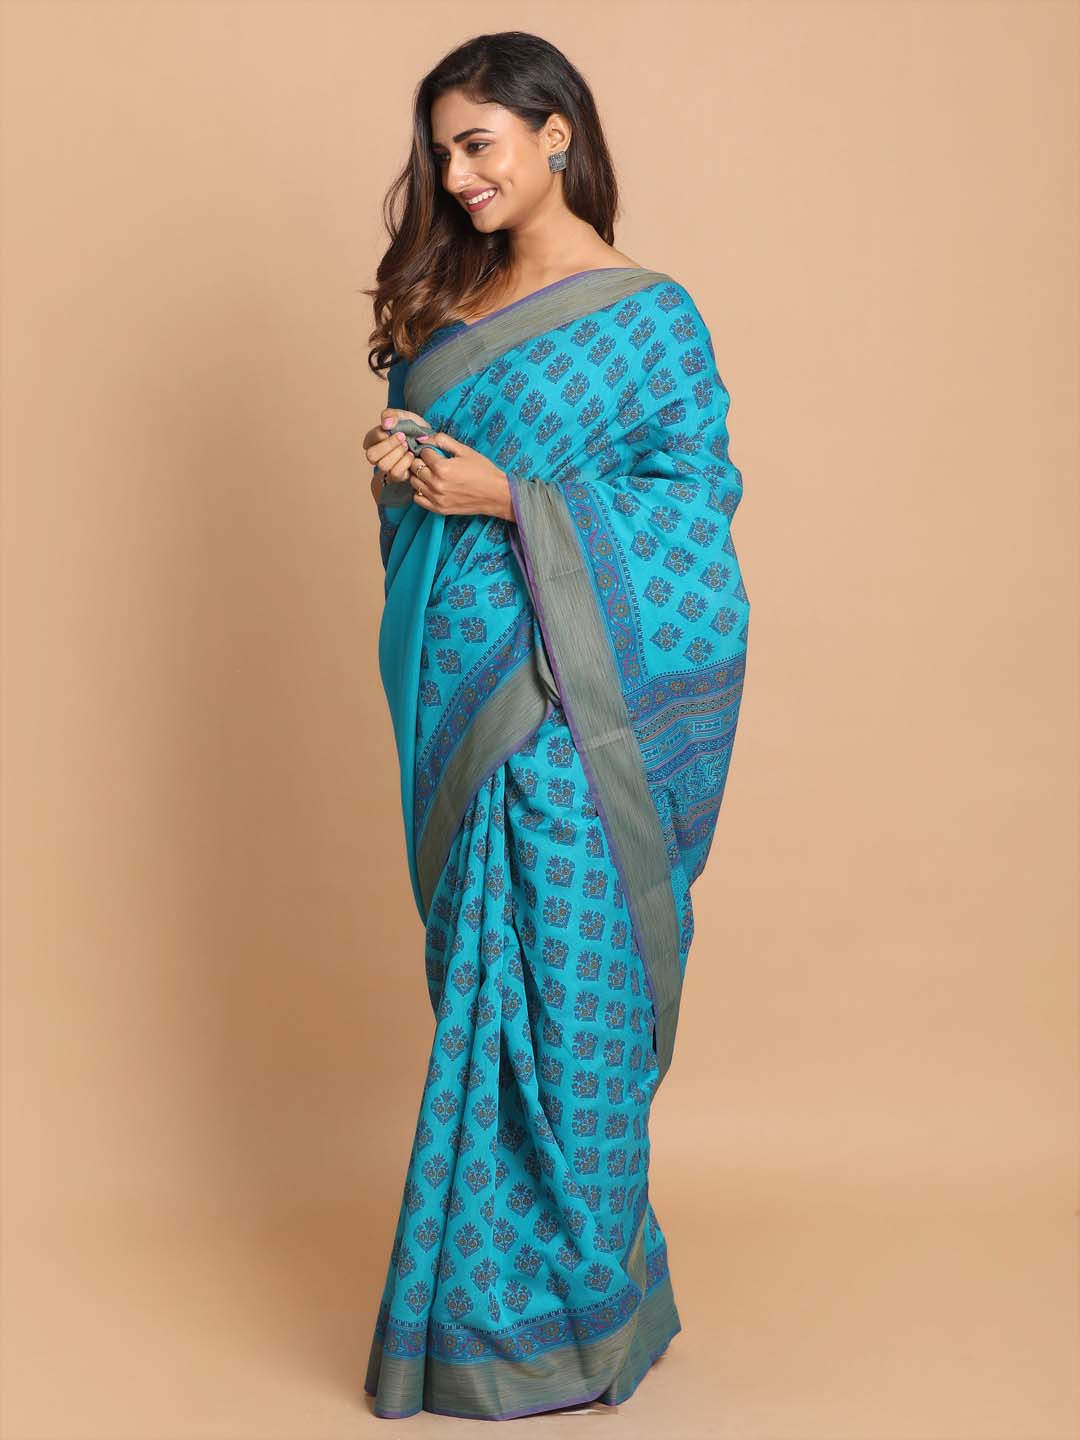 Indethnic Printed Cotton Blend Saree in Firoza - View 2